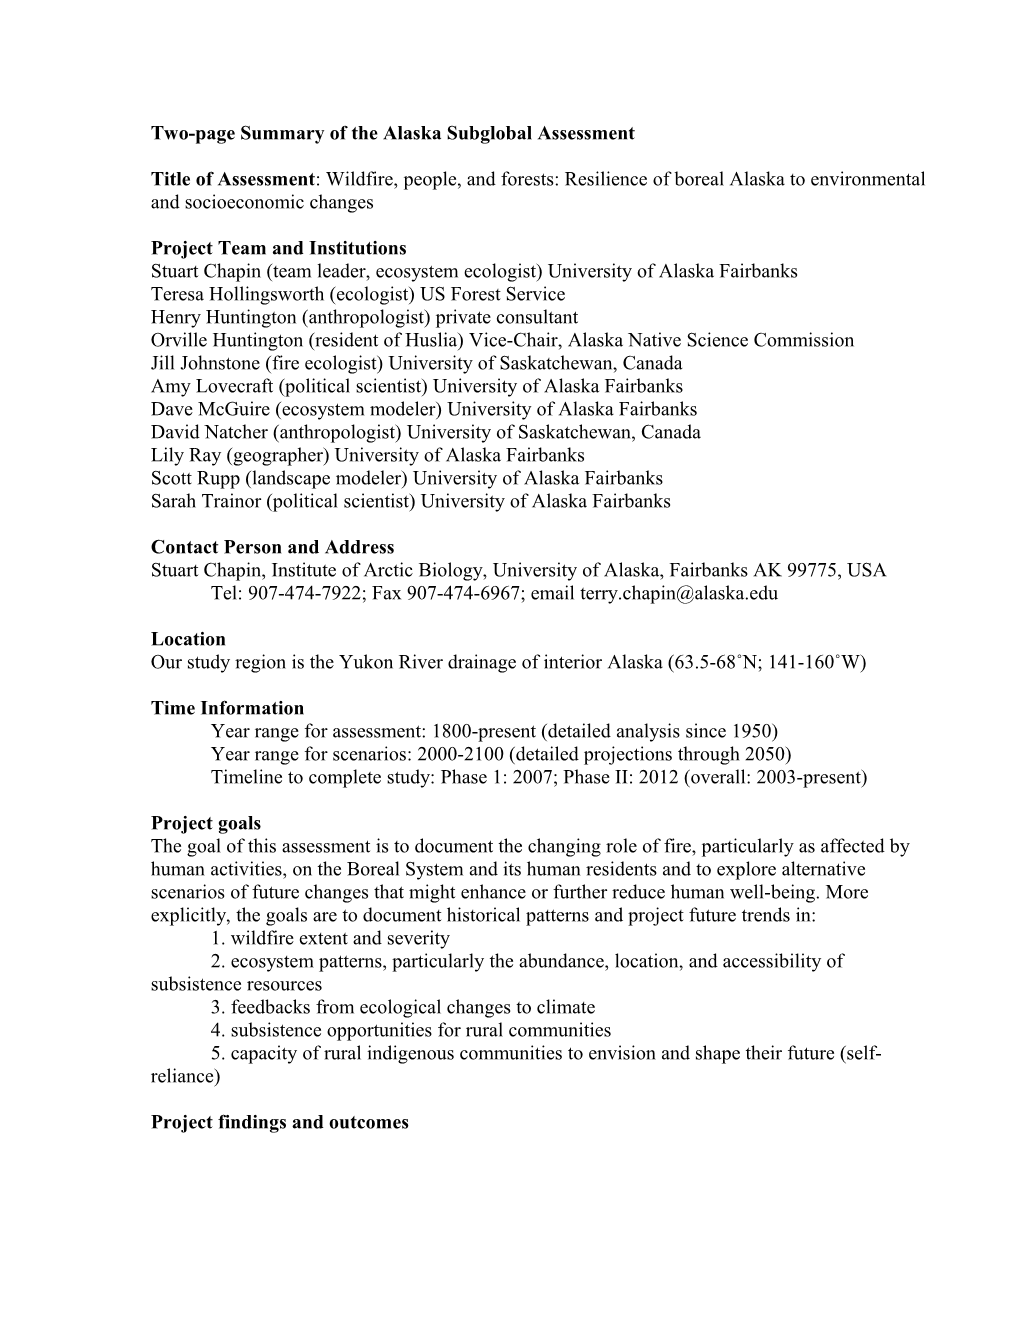 Two-Page Summary of the Alaska Subglobal Assessment